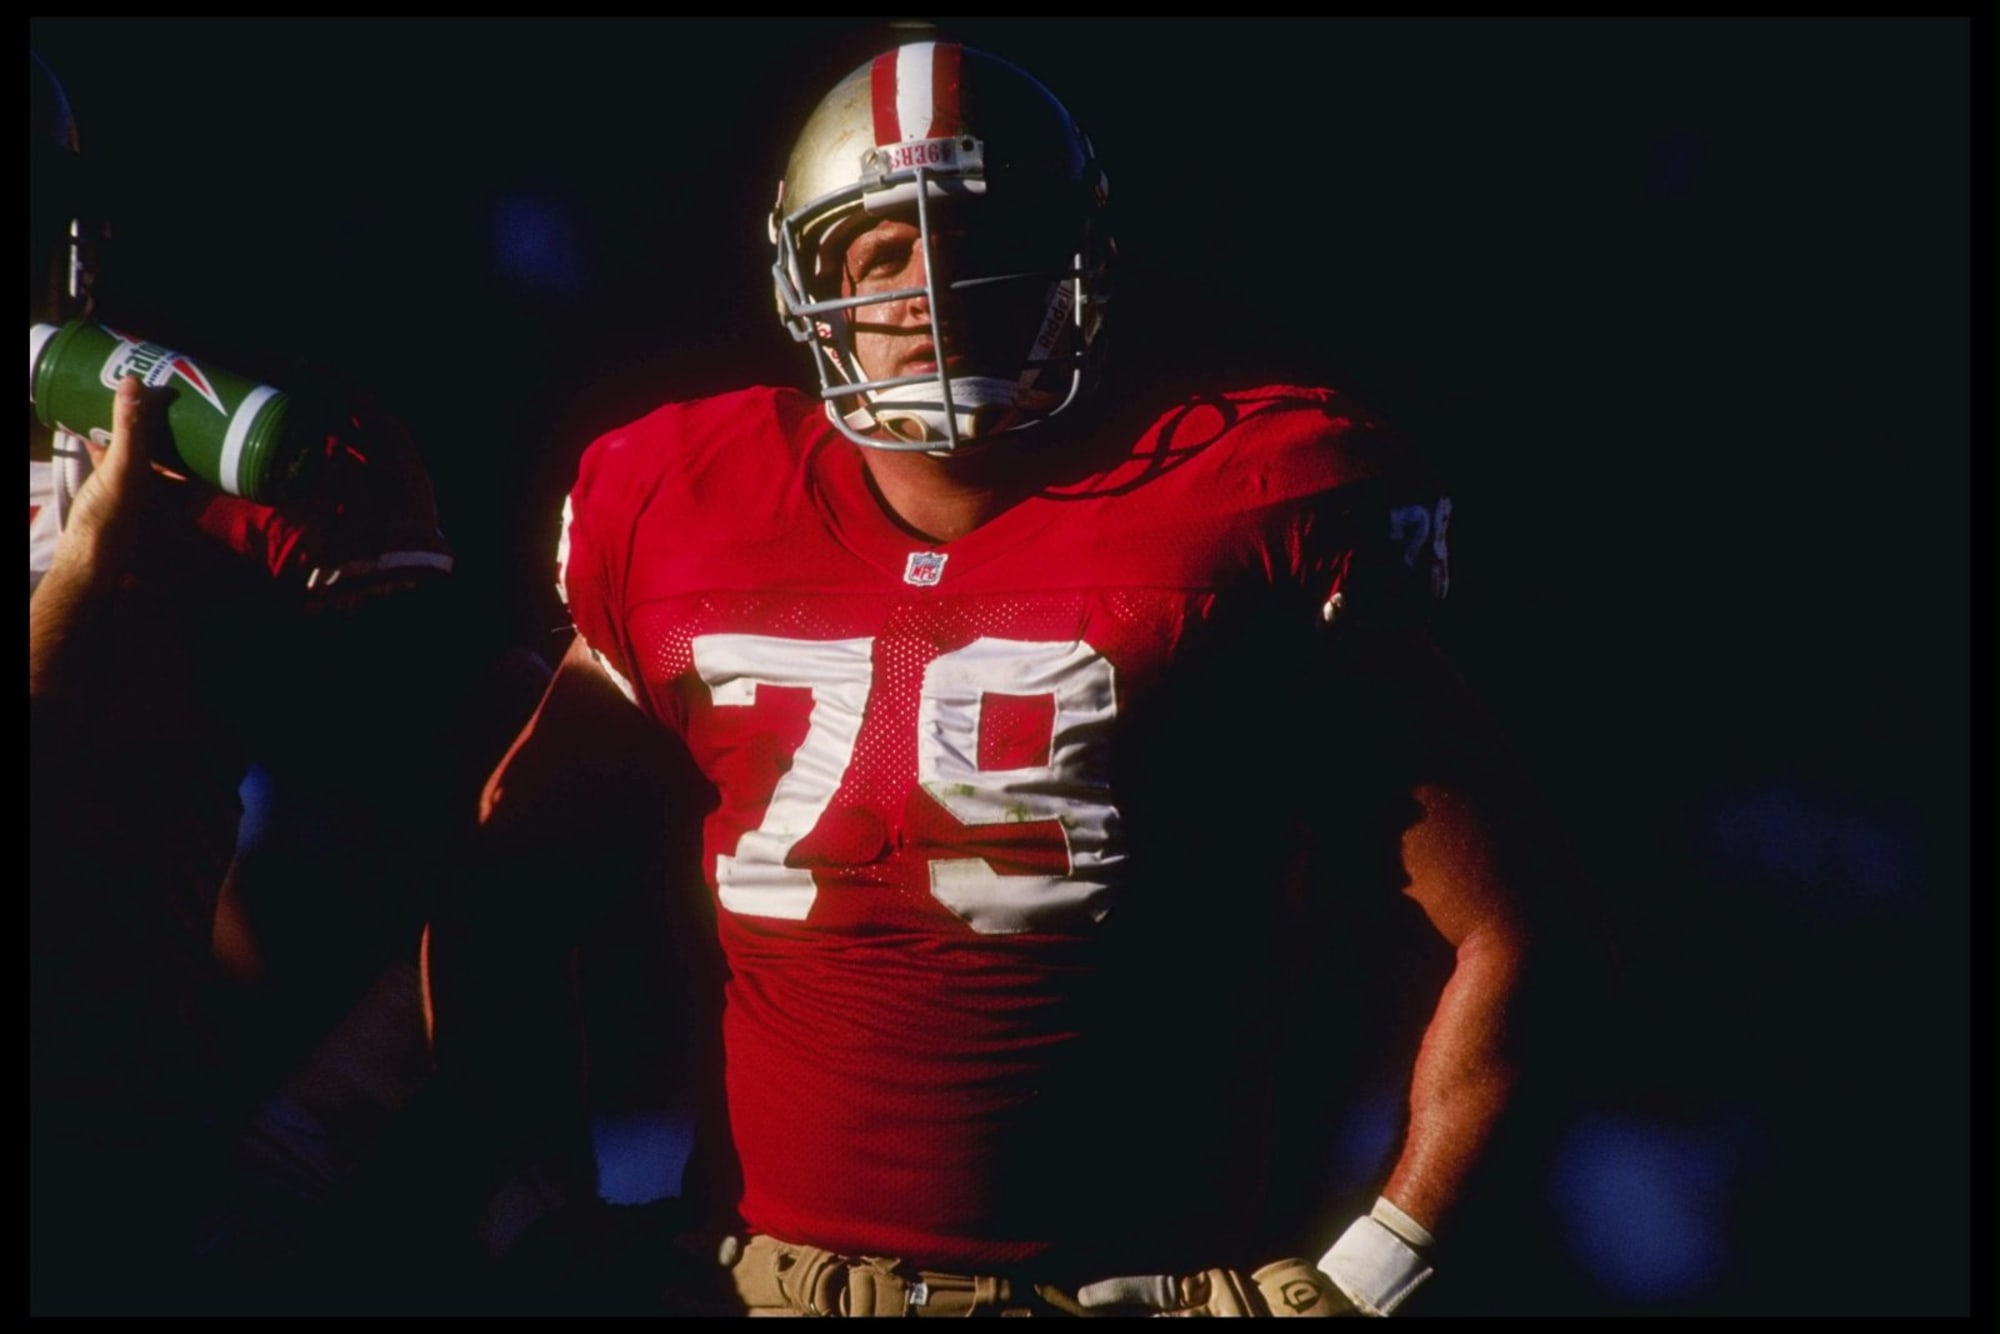 College Football Hall of Fame inductee Harris Barton was exceptional with San Francisco 49ers